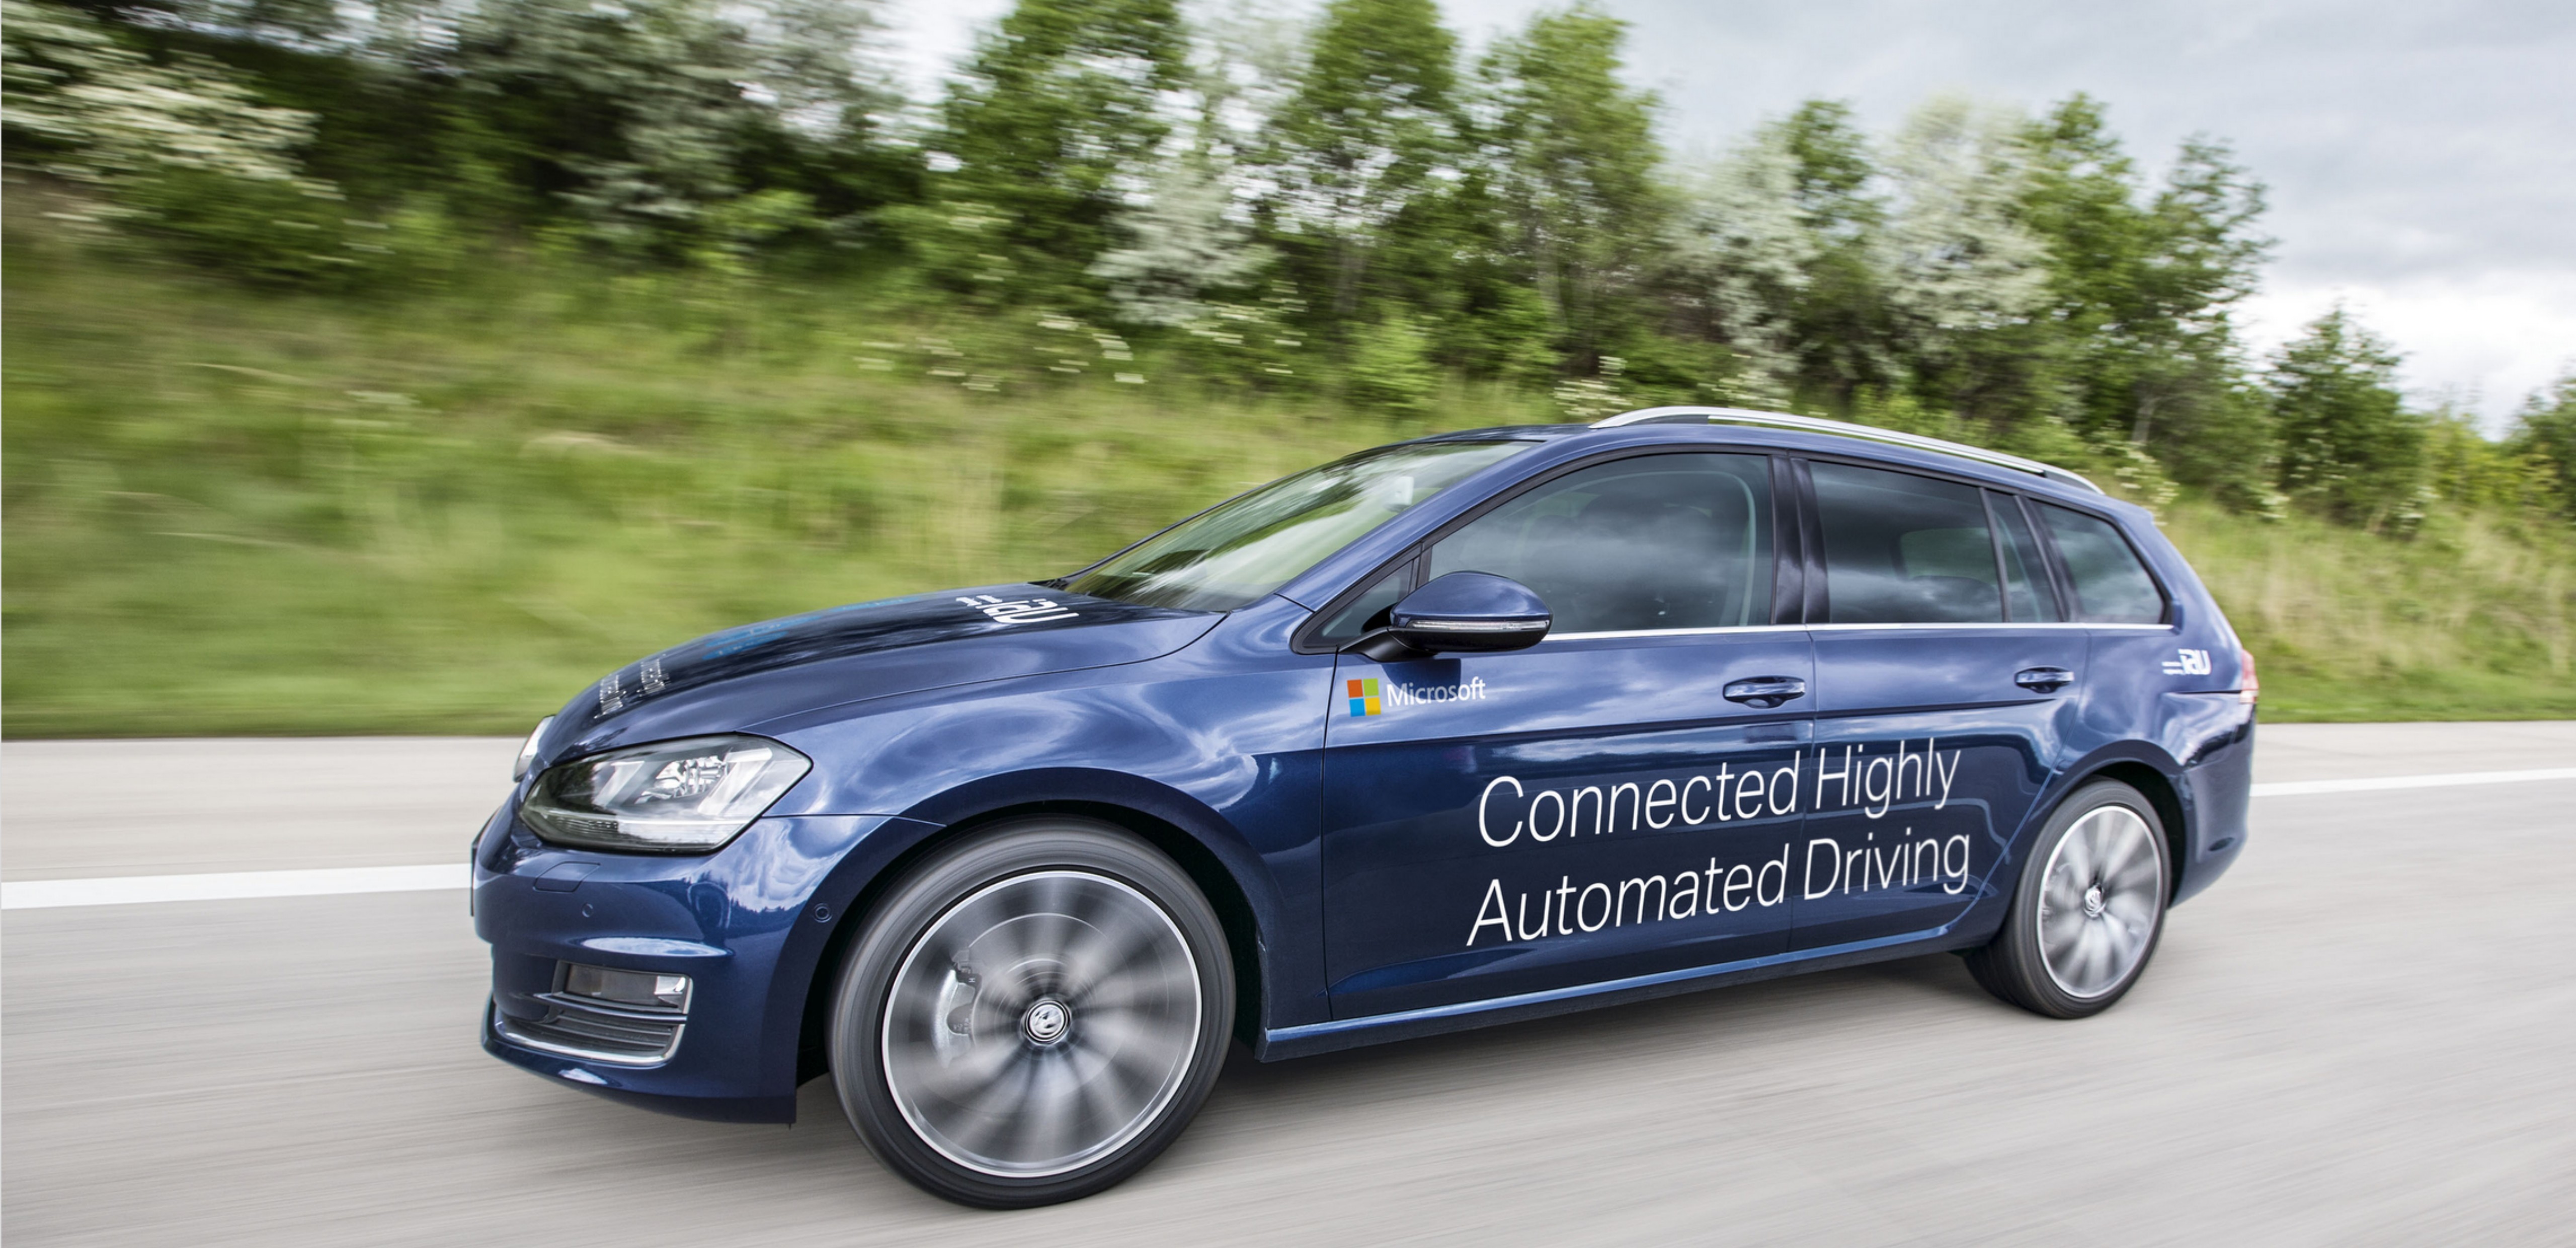 IAV connected highly automated driving